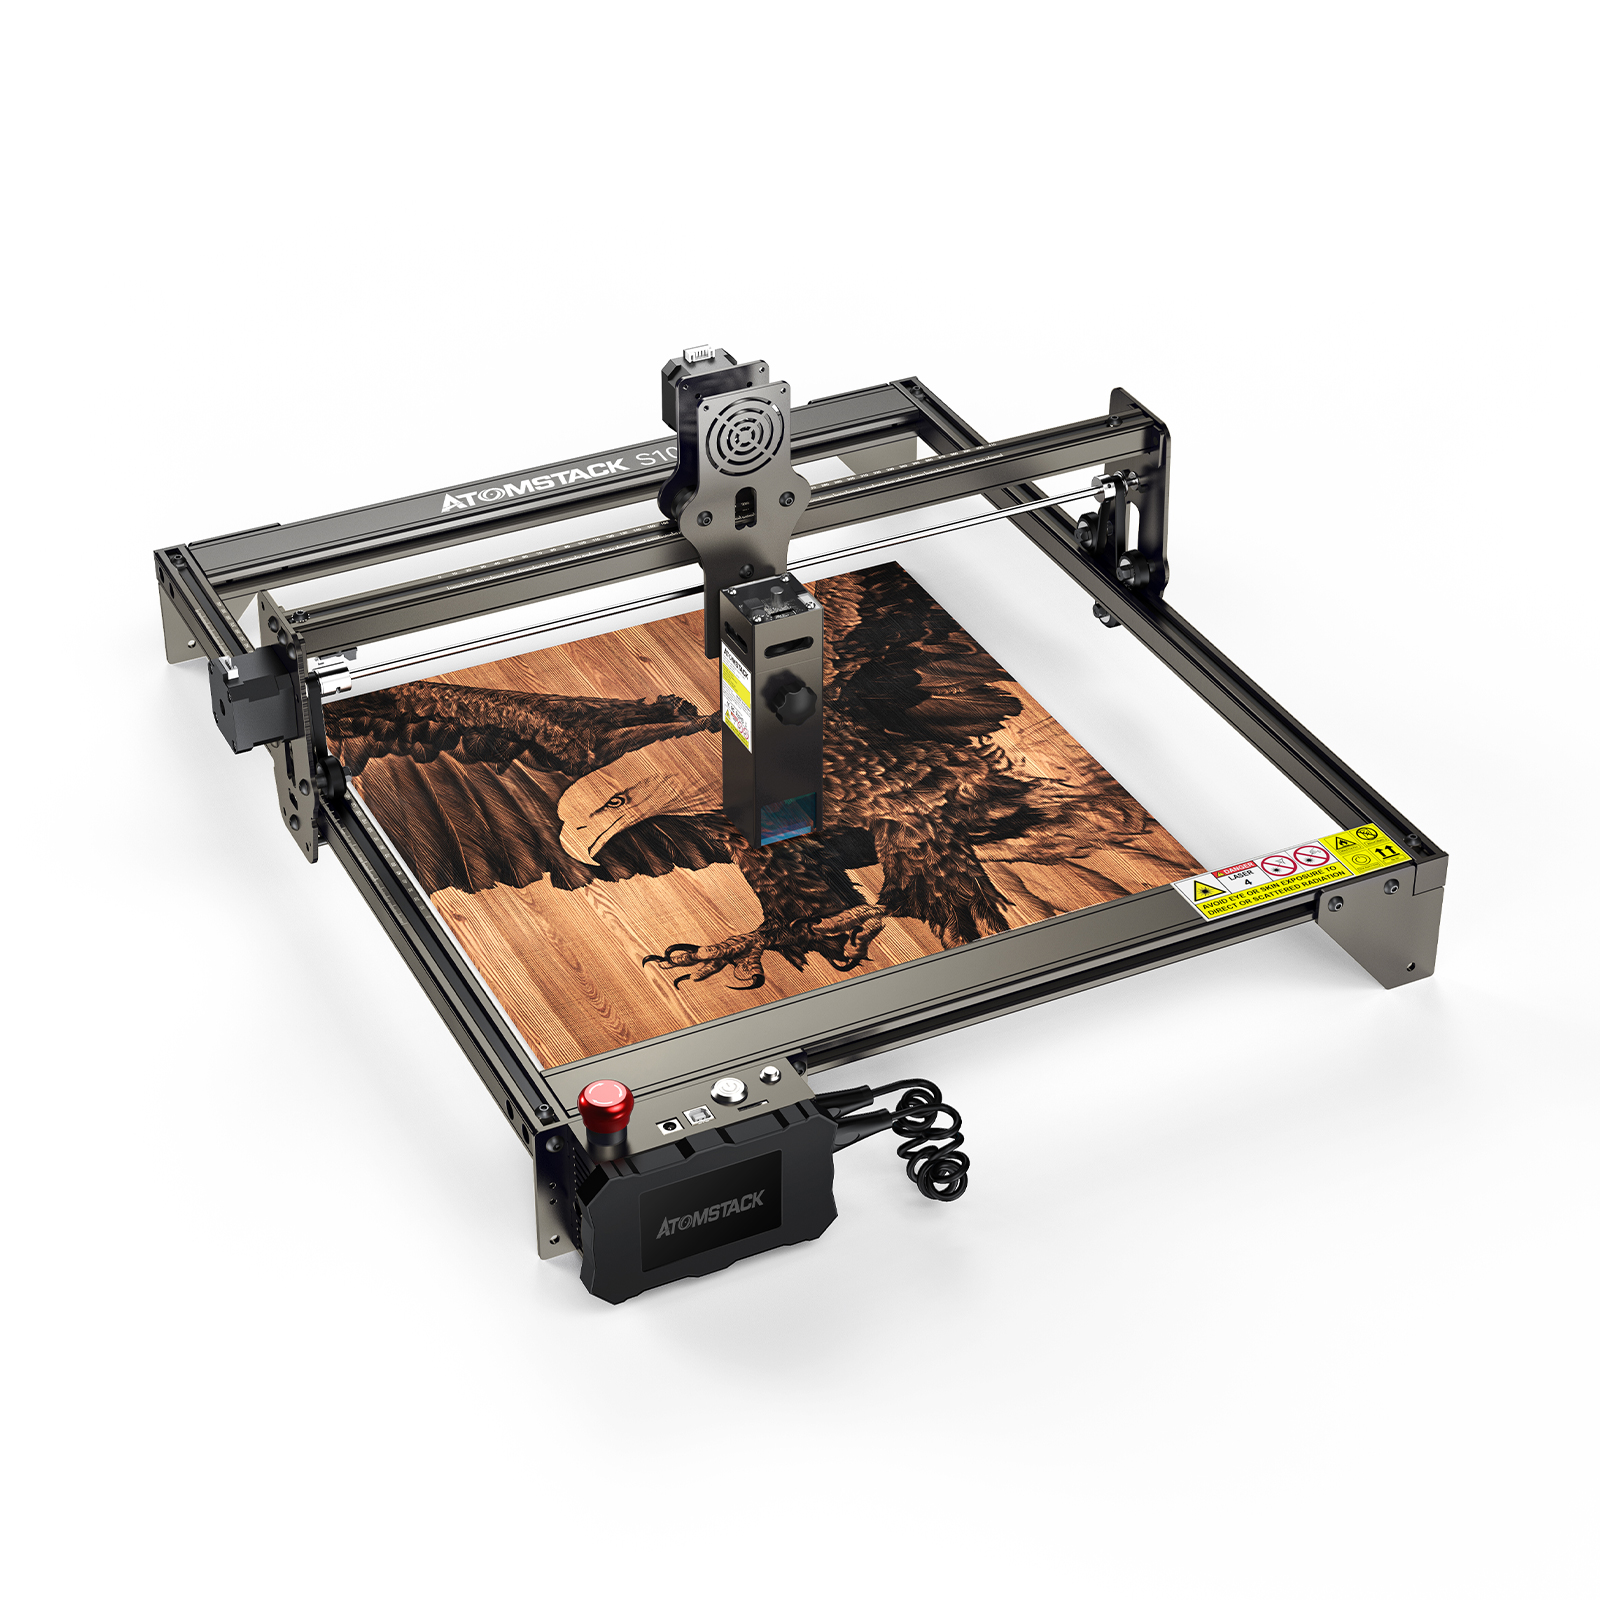 Find [EU Direct] ATOMSTACK S10 PRO Flagship Dual-Laser Laser Engraving Cutting Machine Support Offline Engraving Laser Engraver Cutter 10W Output Power Fixed-Focus 304 Mirror Stainless Steel Engraving Metal Wood Leather Acrylic DIY Engraver for Sale on Gipsybee.com with cryptocurrencies